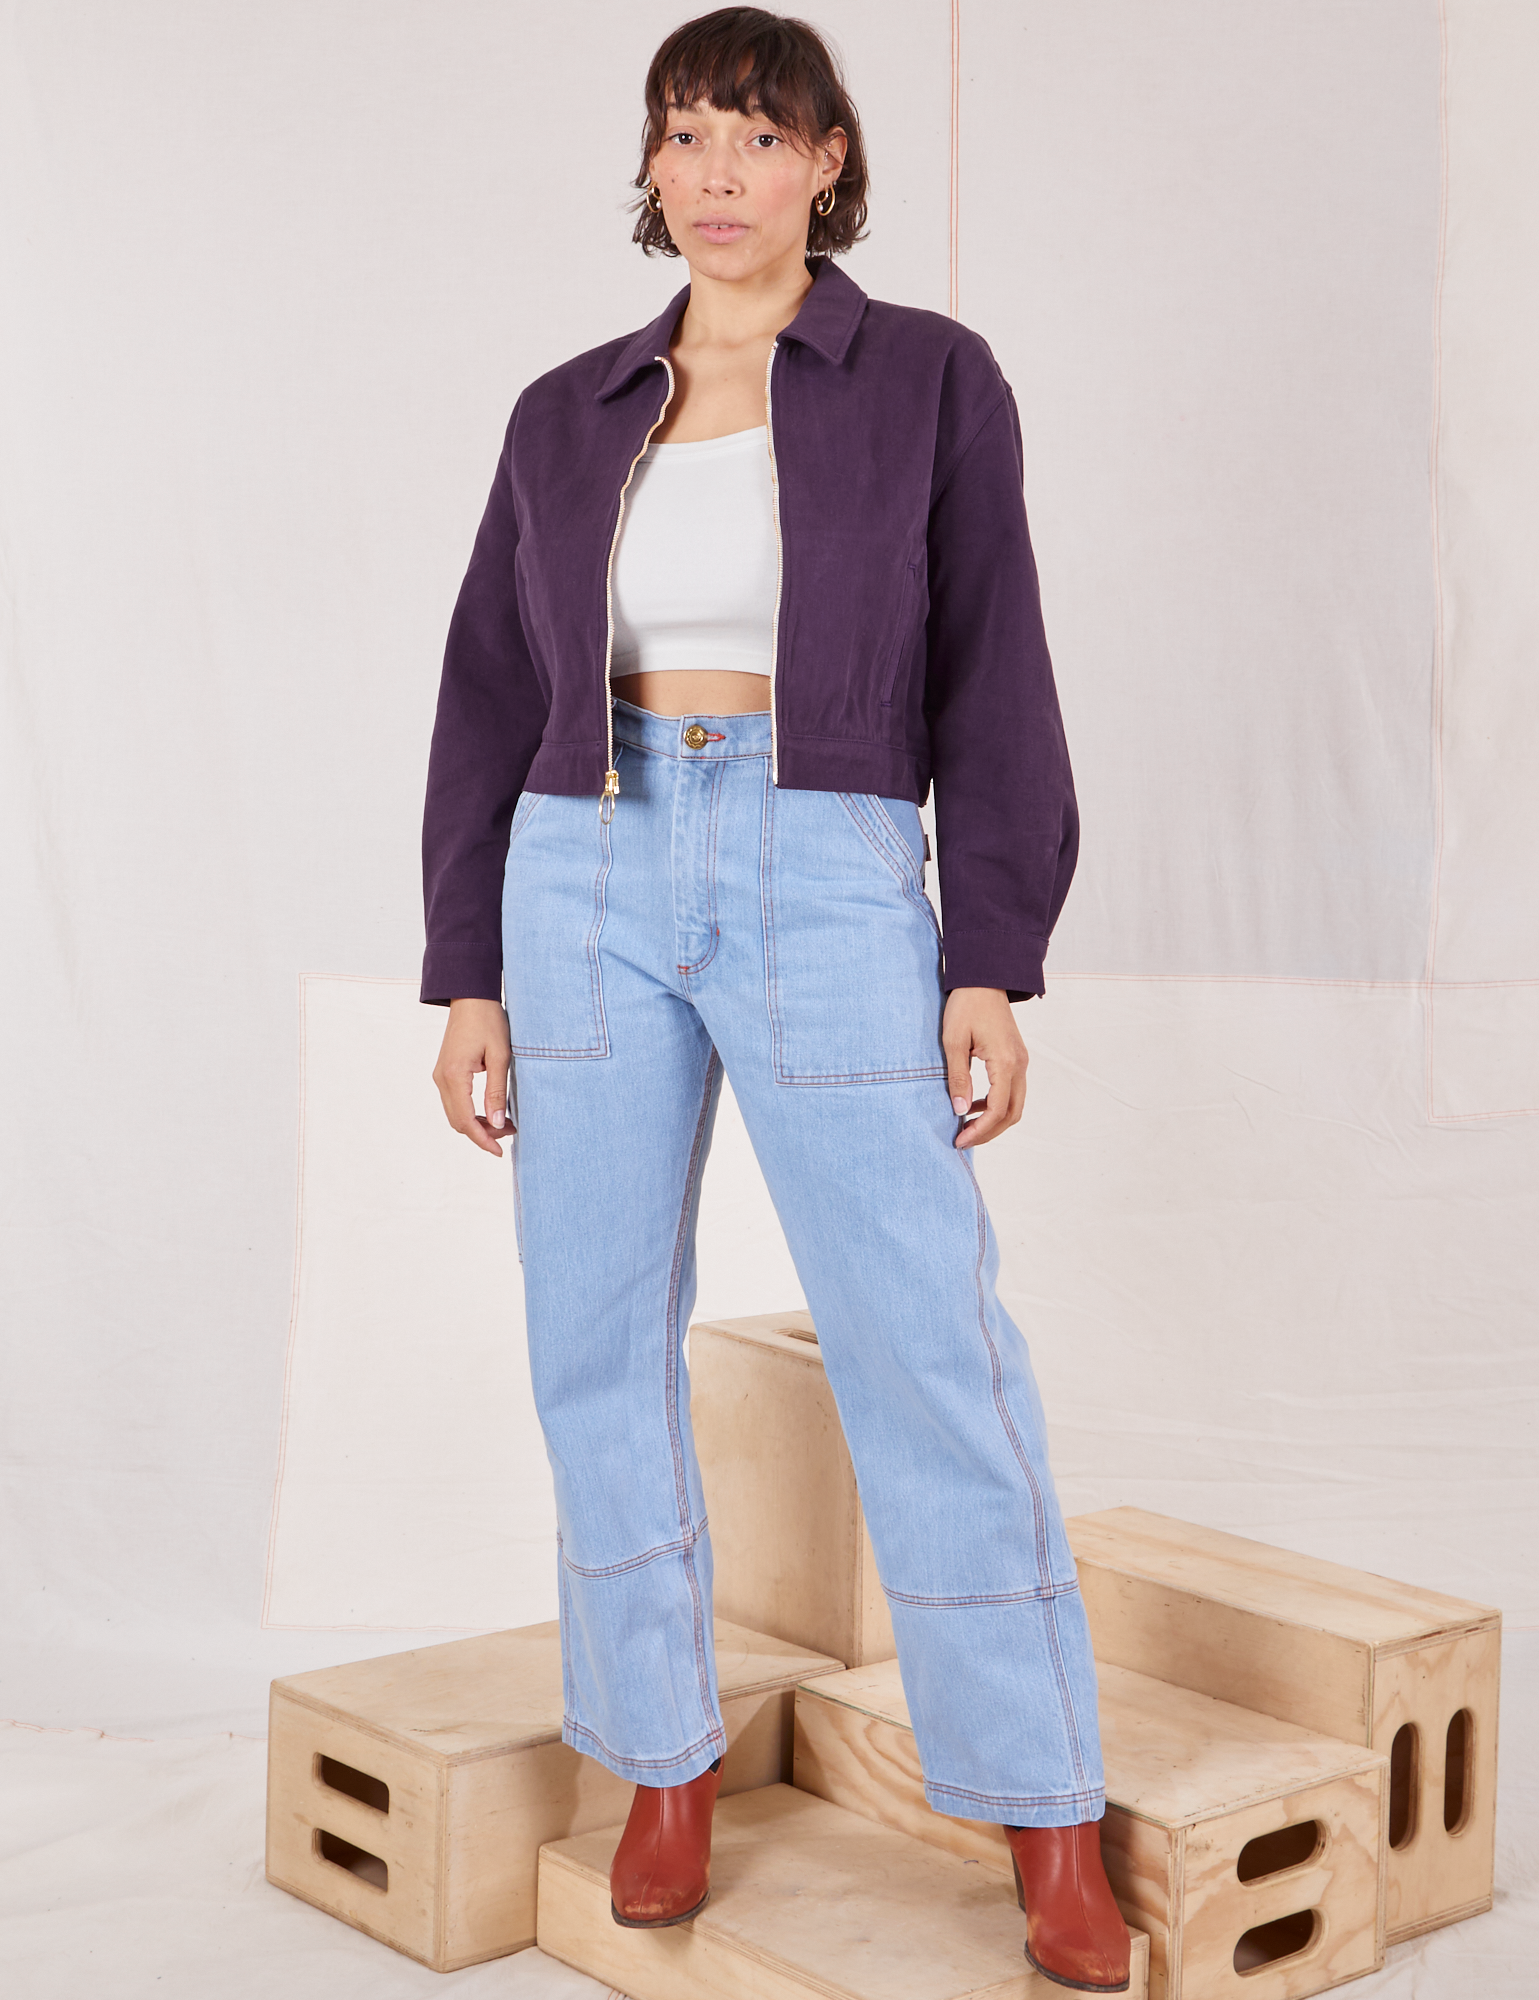 Tiara is wearing Ricky Jacket in Nebula Purple and vintage tee off-white Cami and light wash Carpenter Jeans